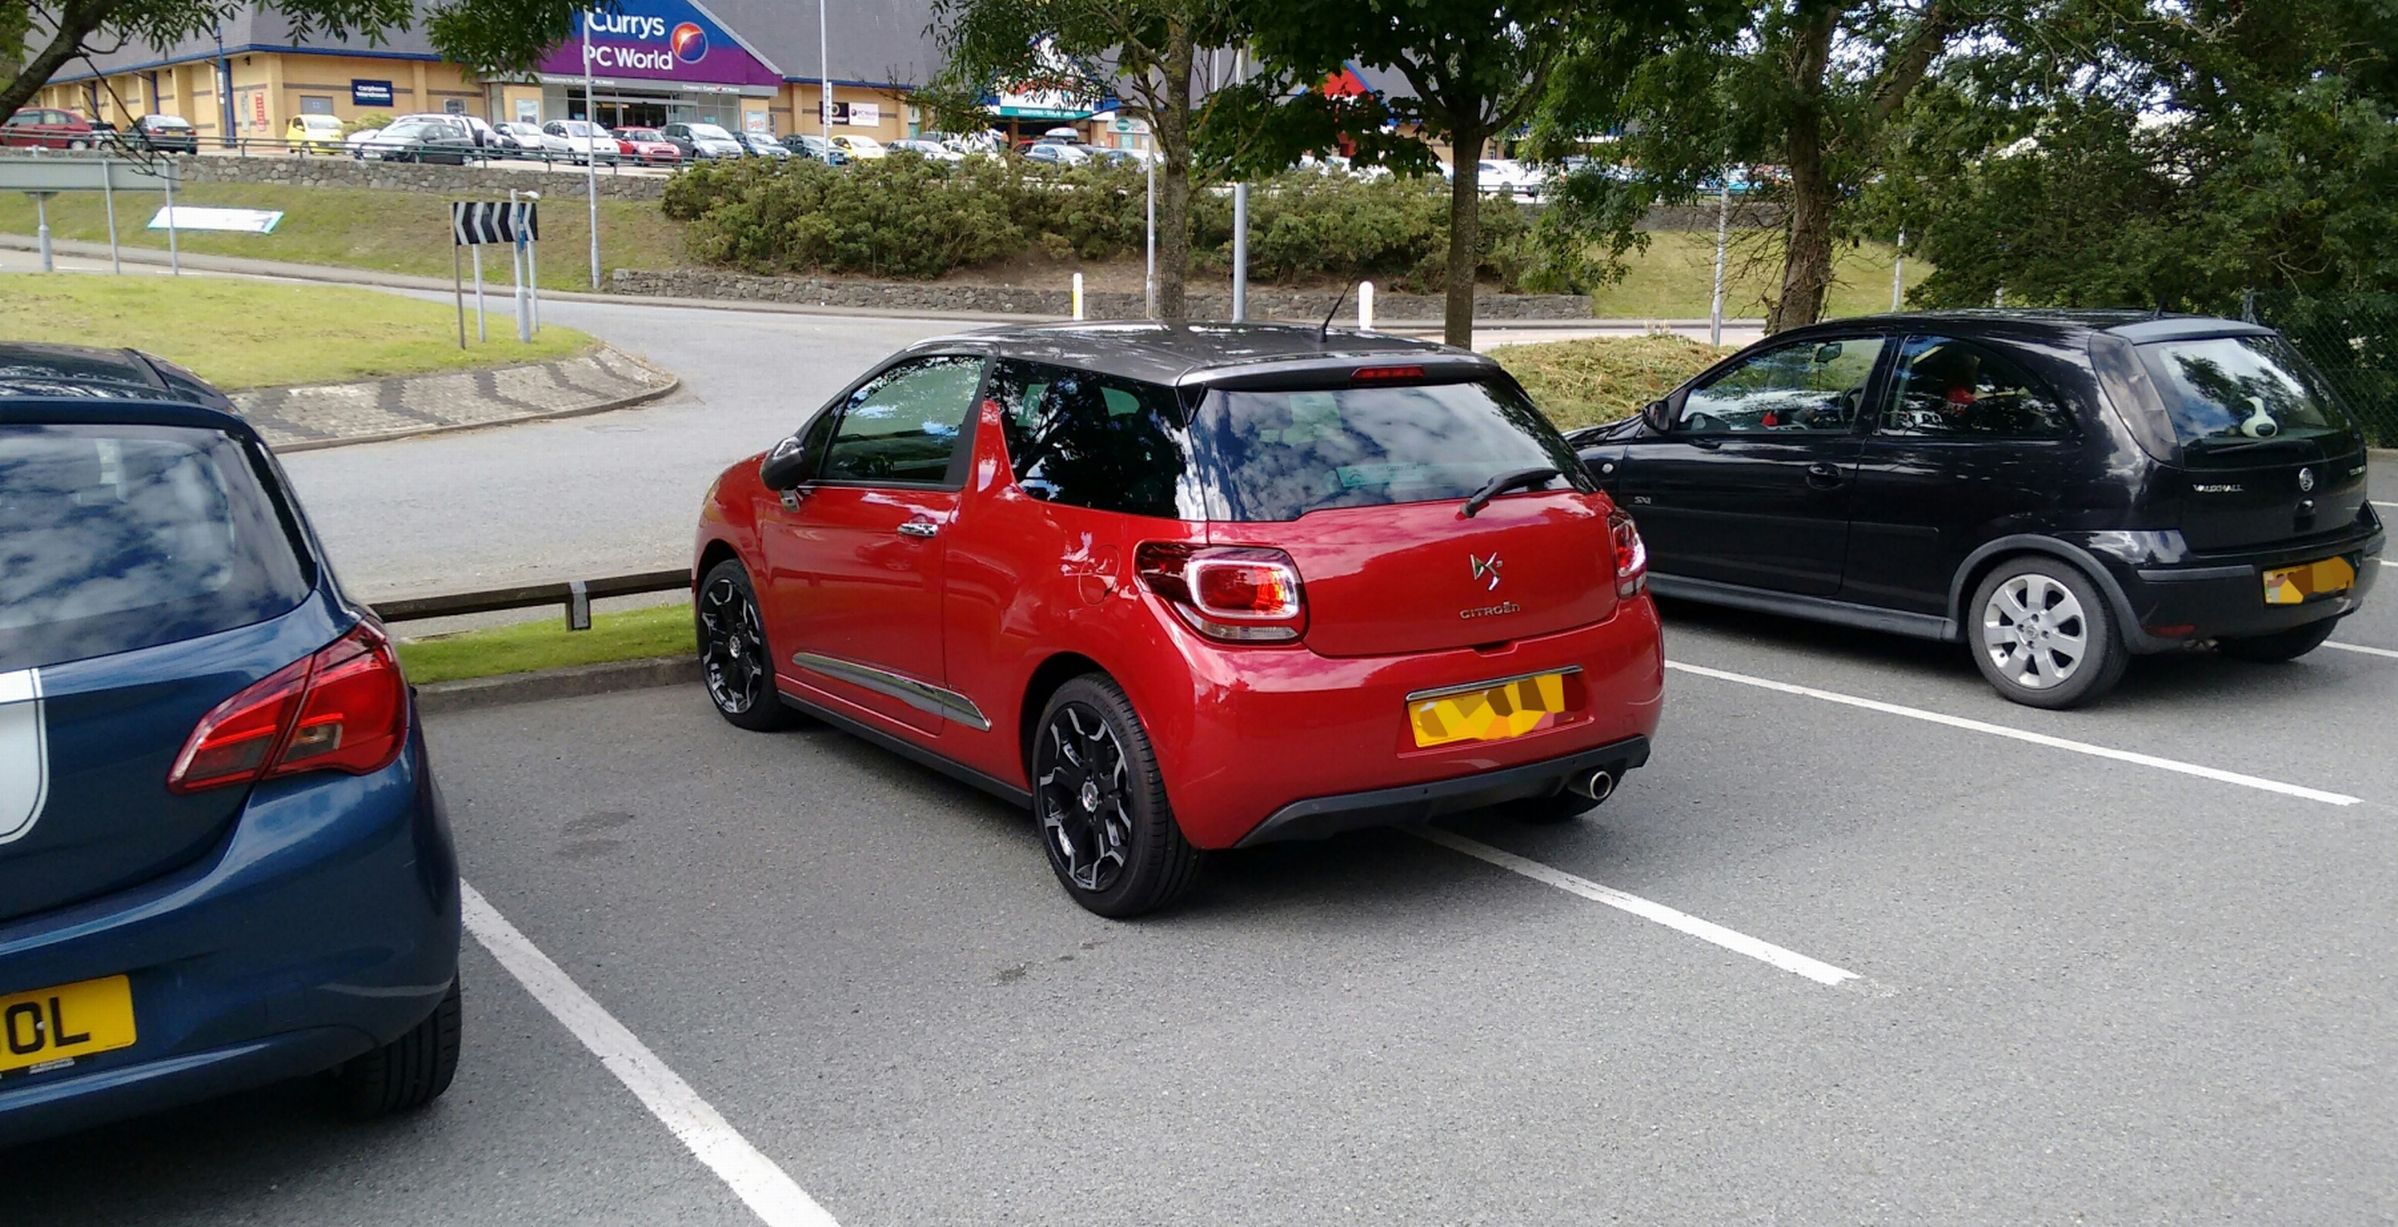 Bad parking in North Wales - Daily Post